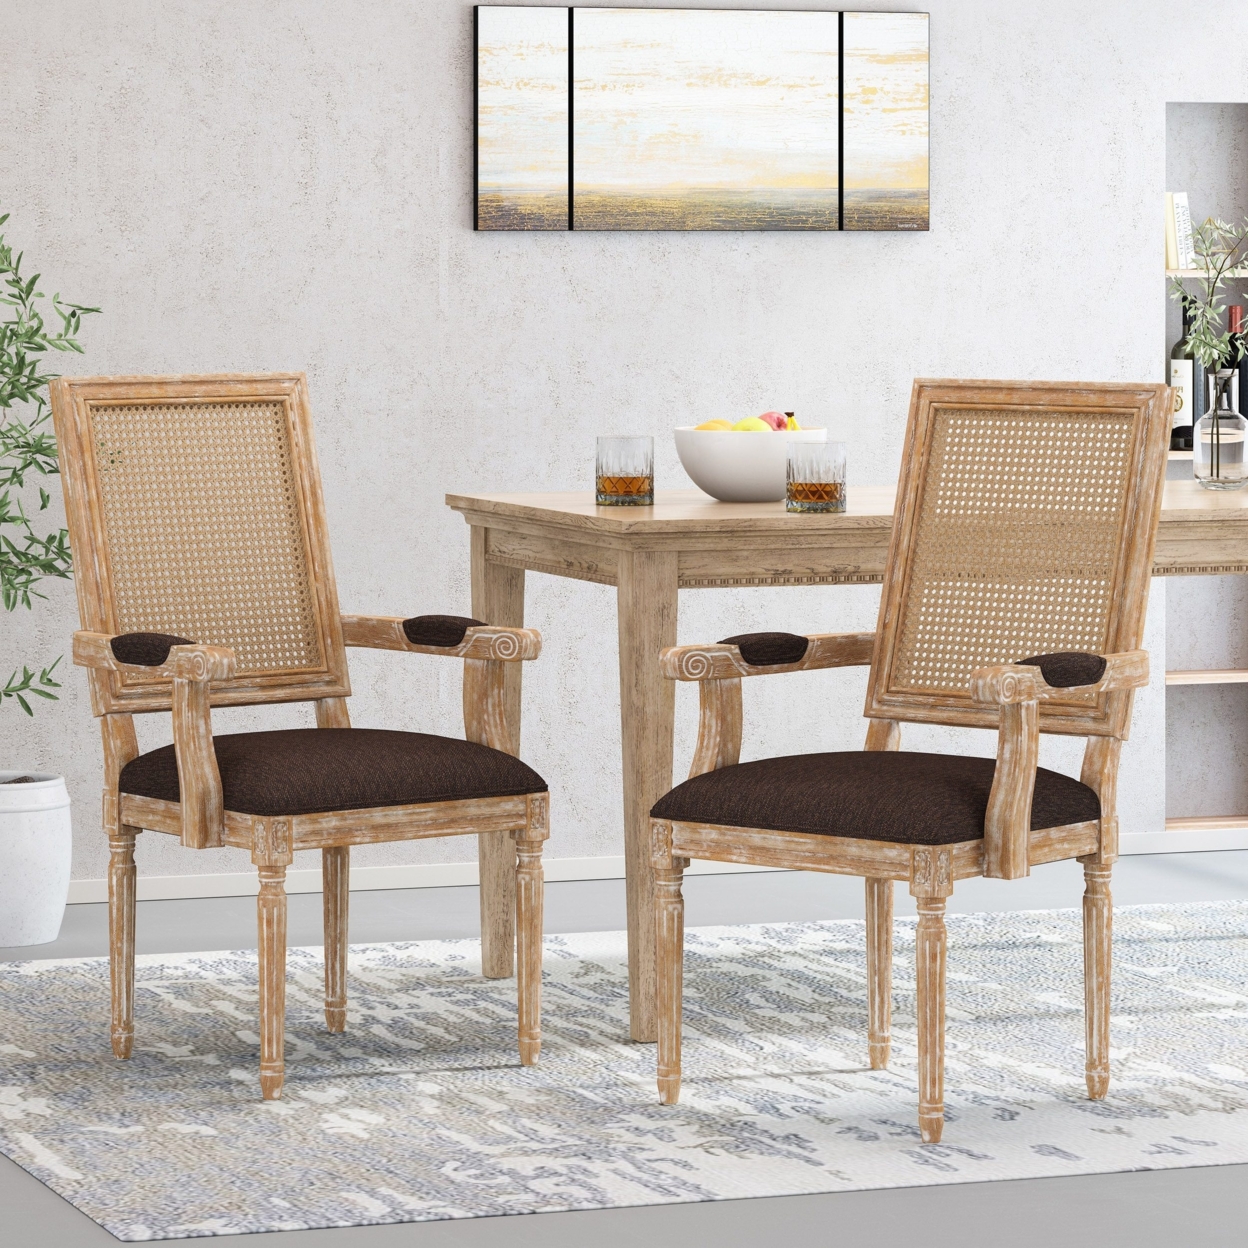 Zentner French Country Wood And Cane Upholstered Dining Chair - Gray/brown, Set Of 2